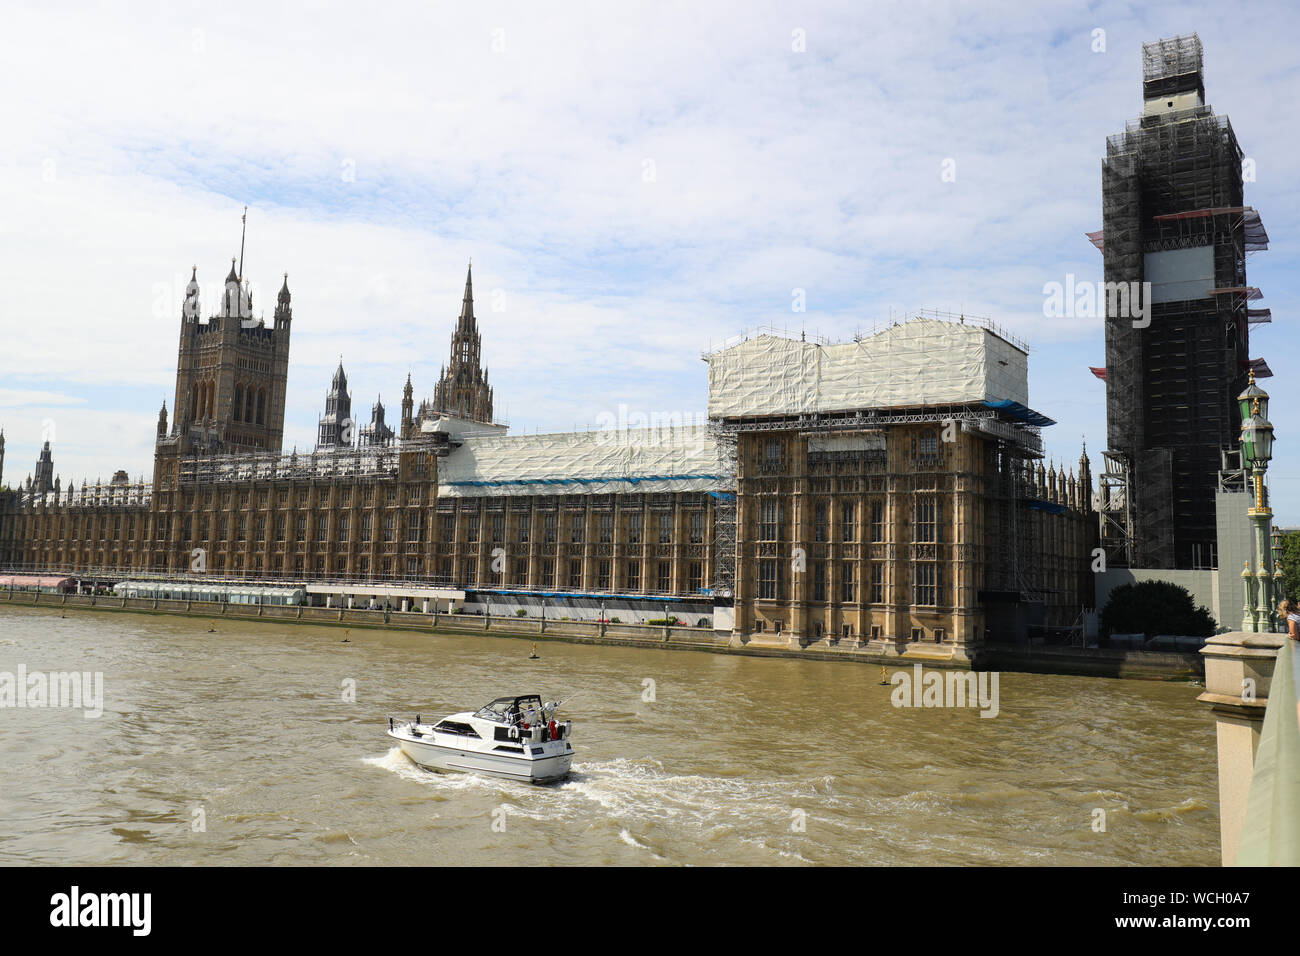 View of the Houses of Parliament, Prime Minister Boris Johnson is seeking a suspension of Parliament ahead of a Queen's Speech on October 14. Suspending Parliament will reduce the time for opponents to schedule Parliamentary business before the Brexit deadline. Stock Photo